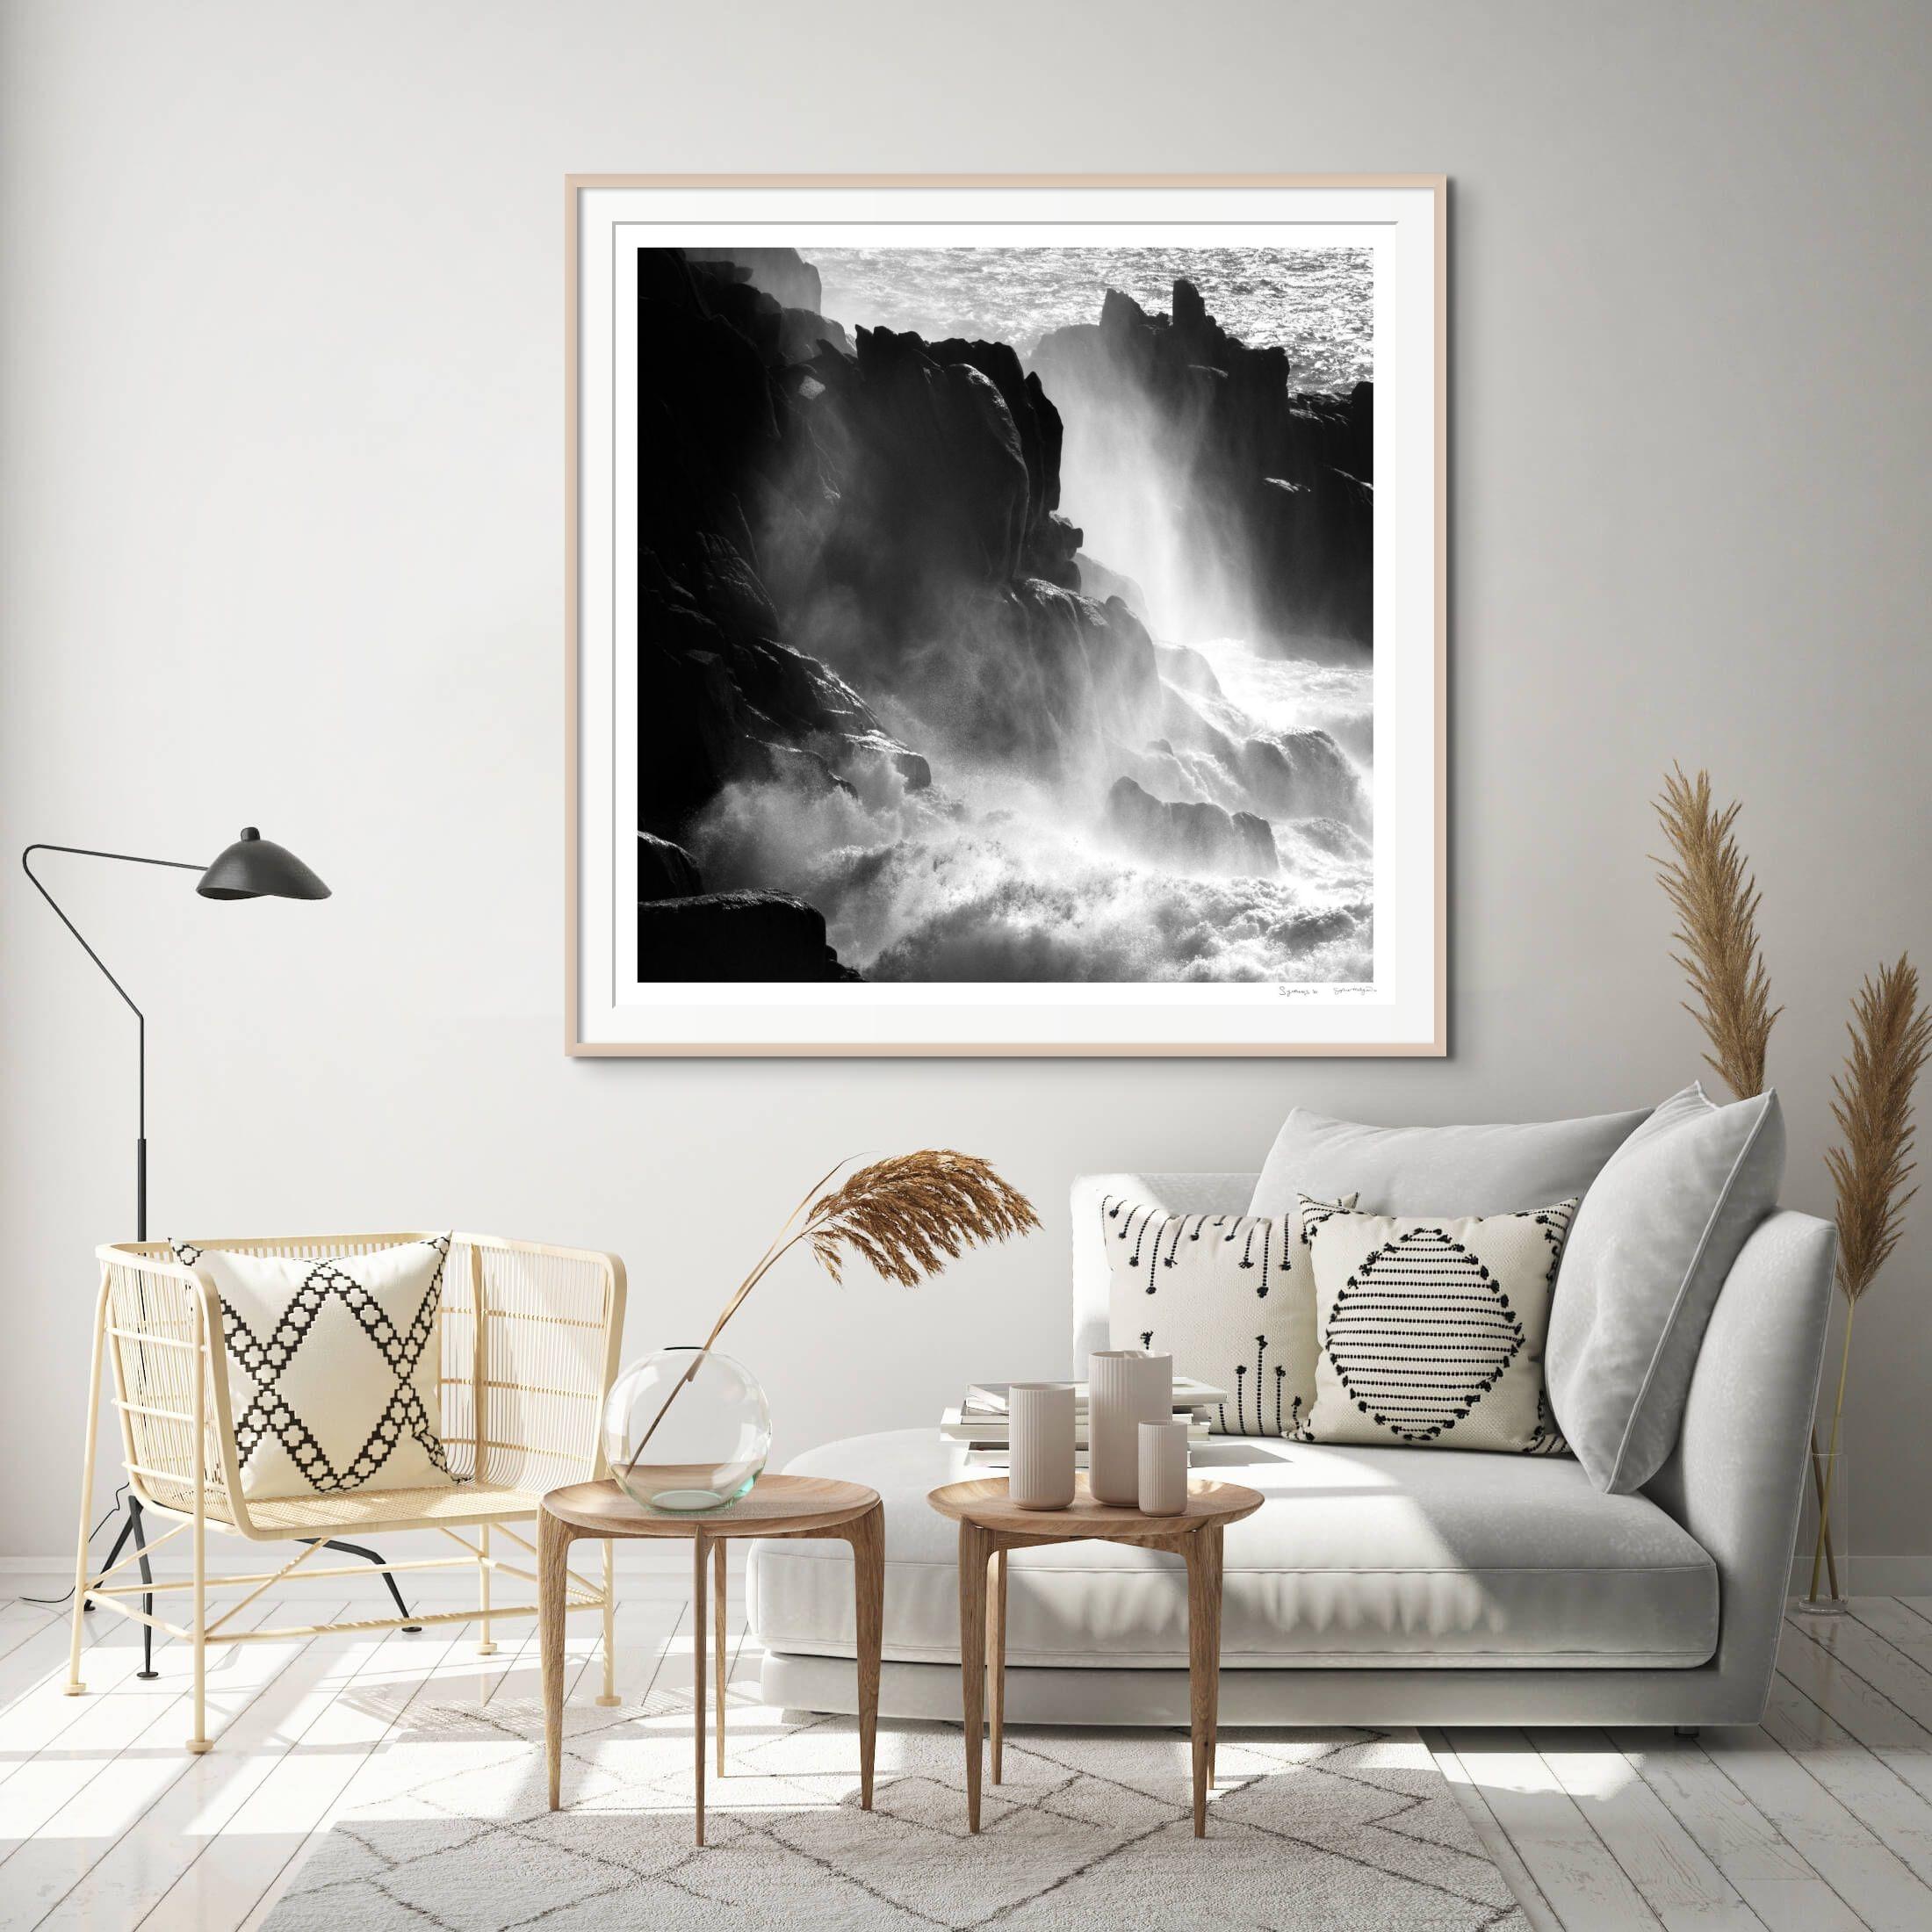 'Synthesis' 
Limited Edition Black and White Archival Photograph. Unframed
_________________
The wild Atlantic explodes in a raw release of energy, blurring the boundary between ocean, sky and land. Water, earth and air perform in a dance of